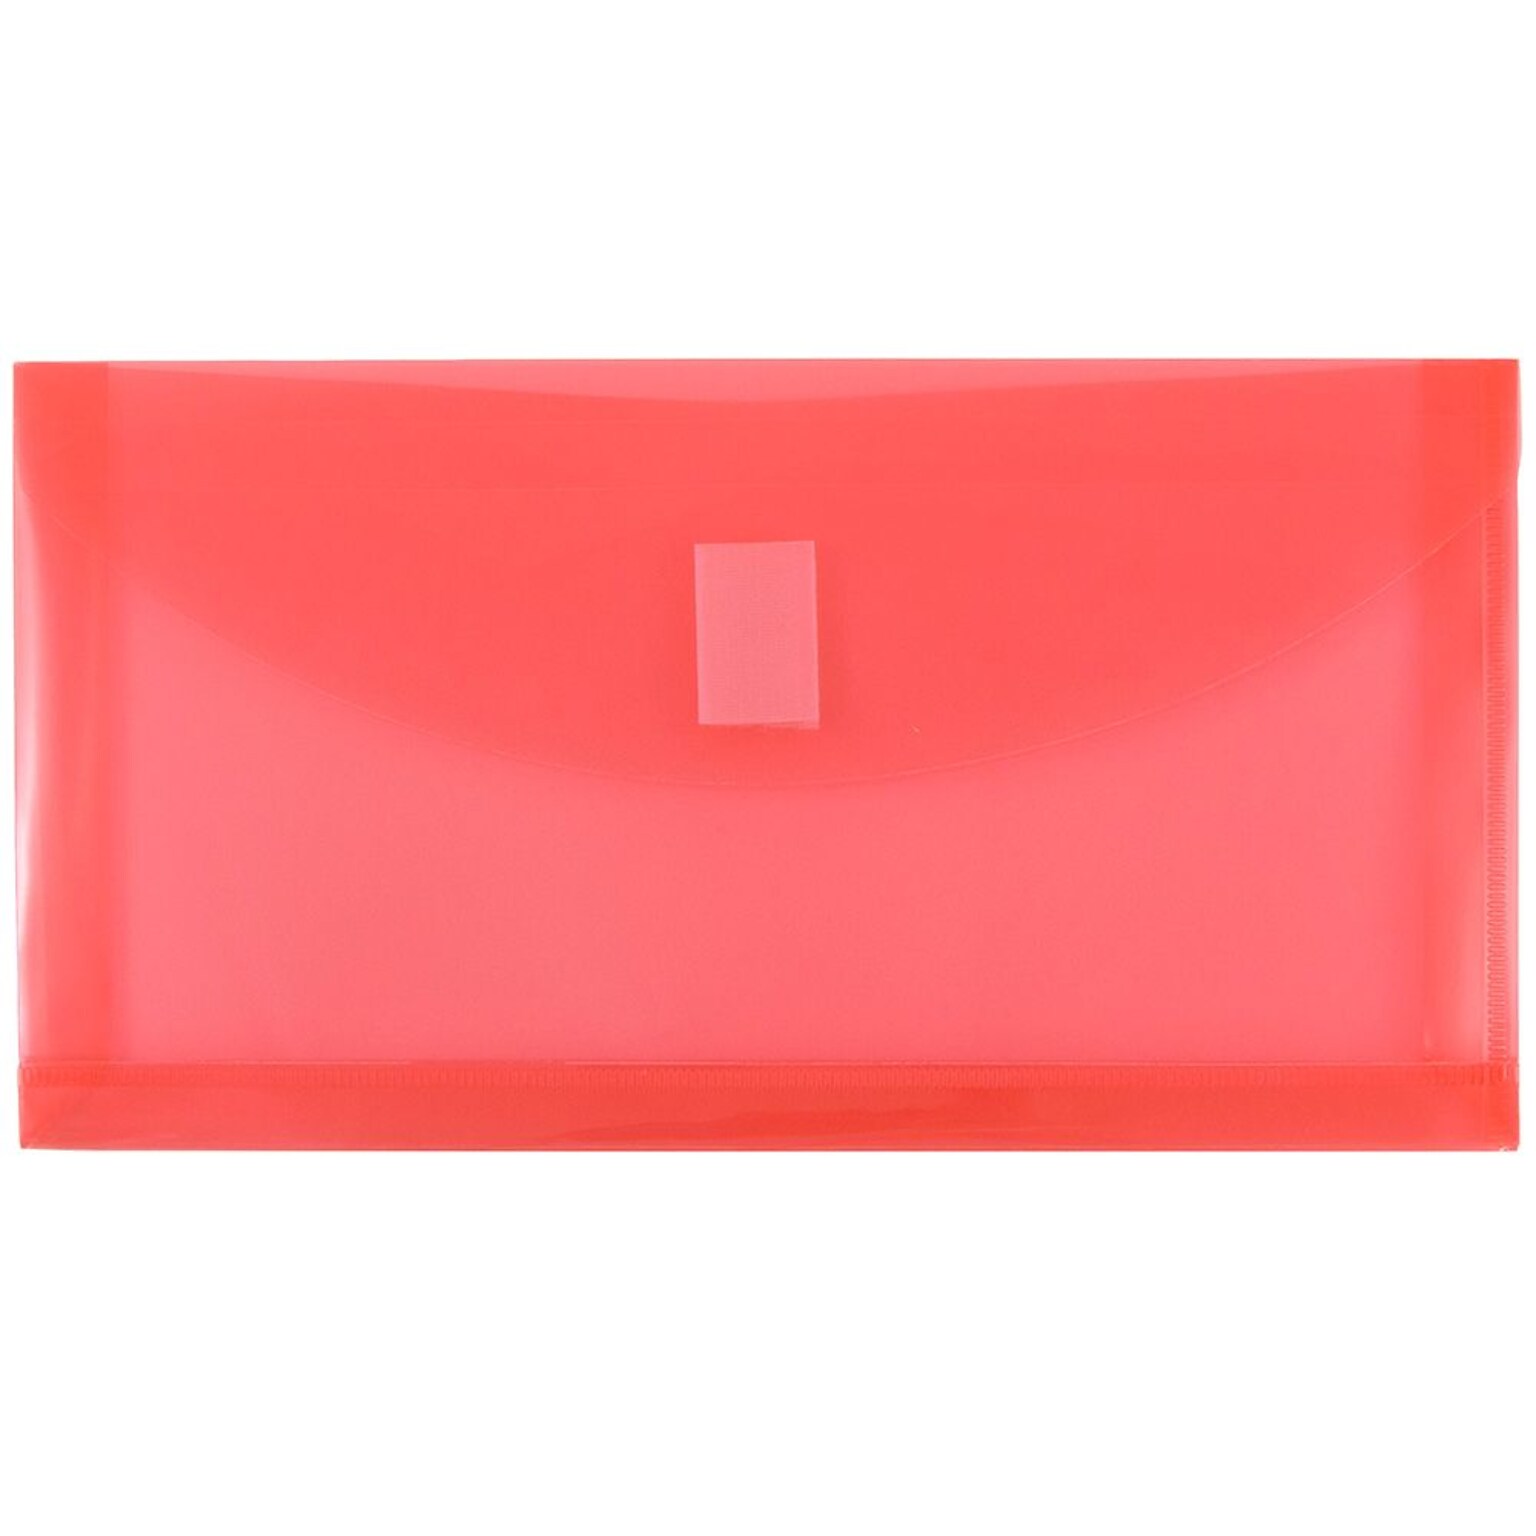 JAM Paper® Plastic Envelopes with Hook & Loop Closure, 1 Expansion, #10, 5.25 x 10, Red Poly, 12 per pack (921V1re)